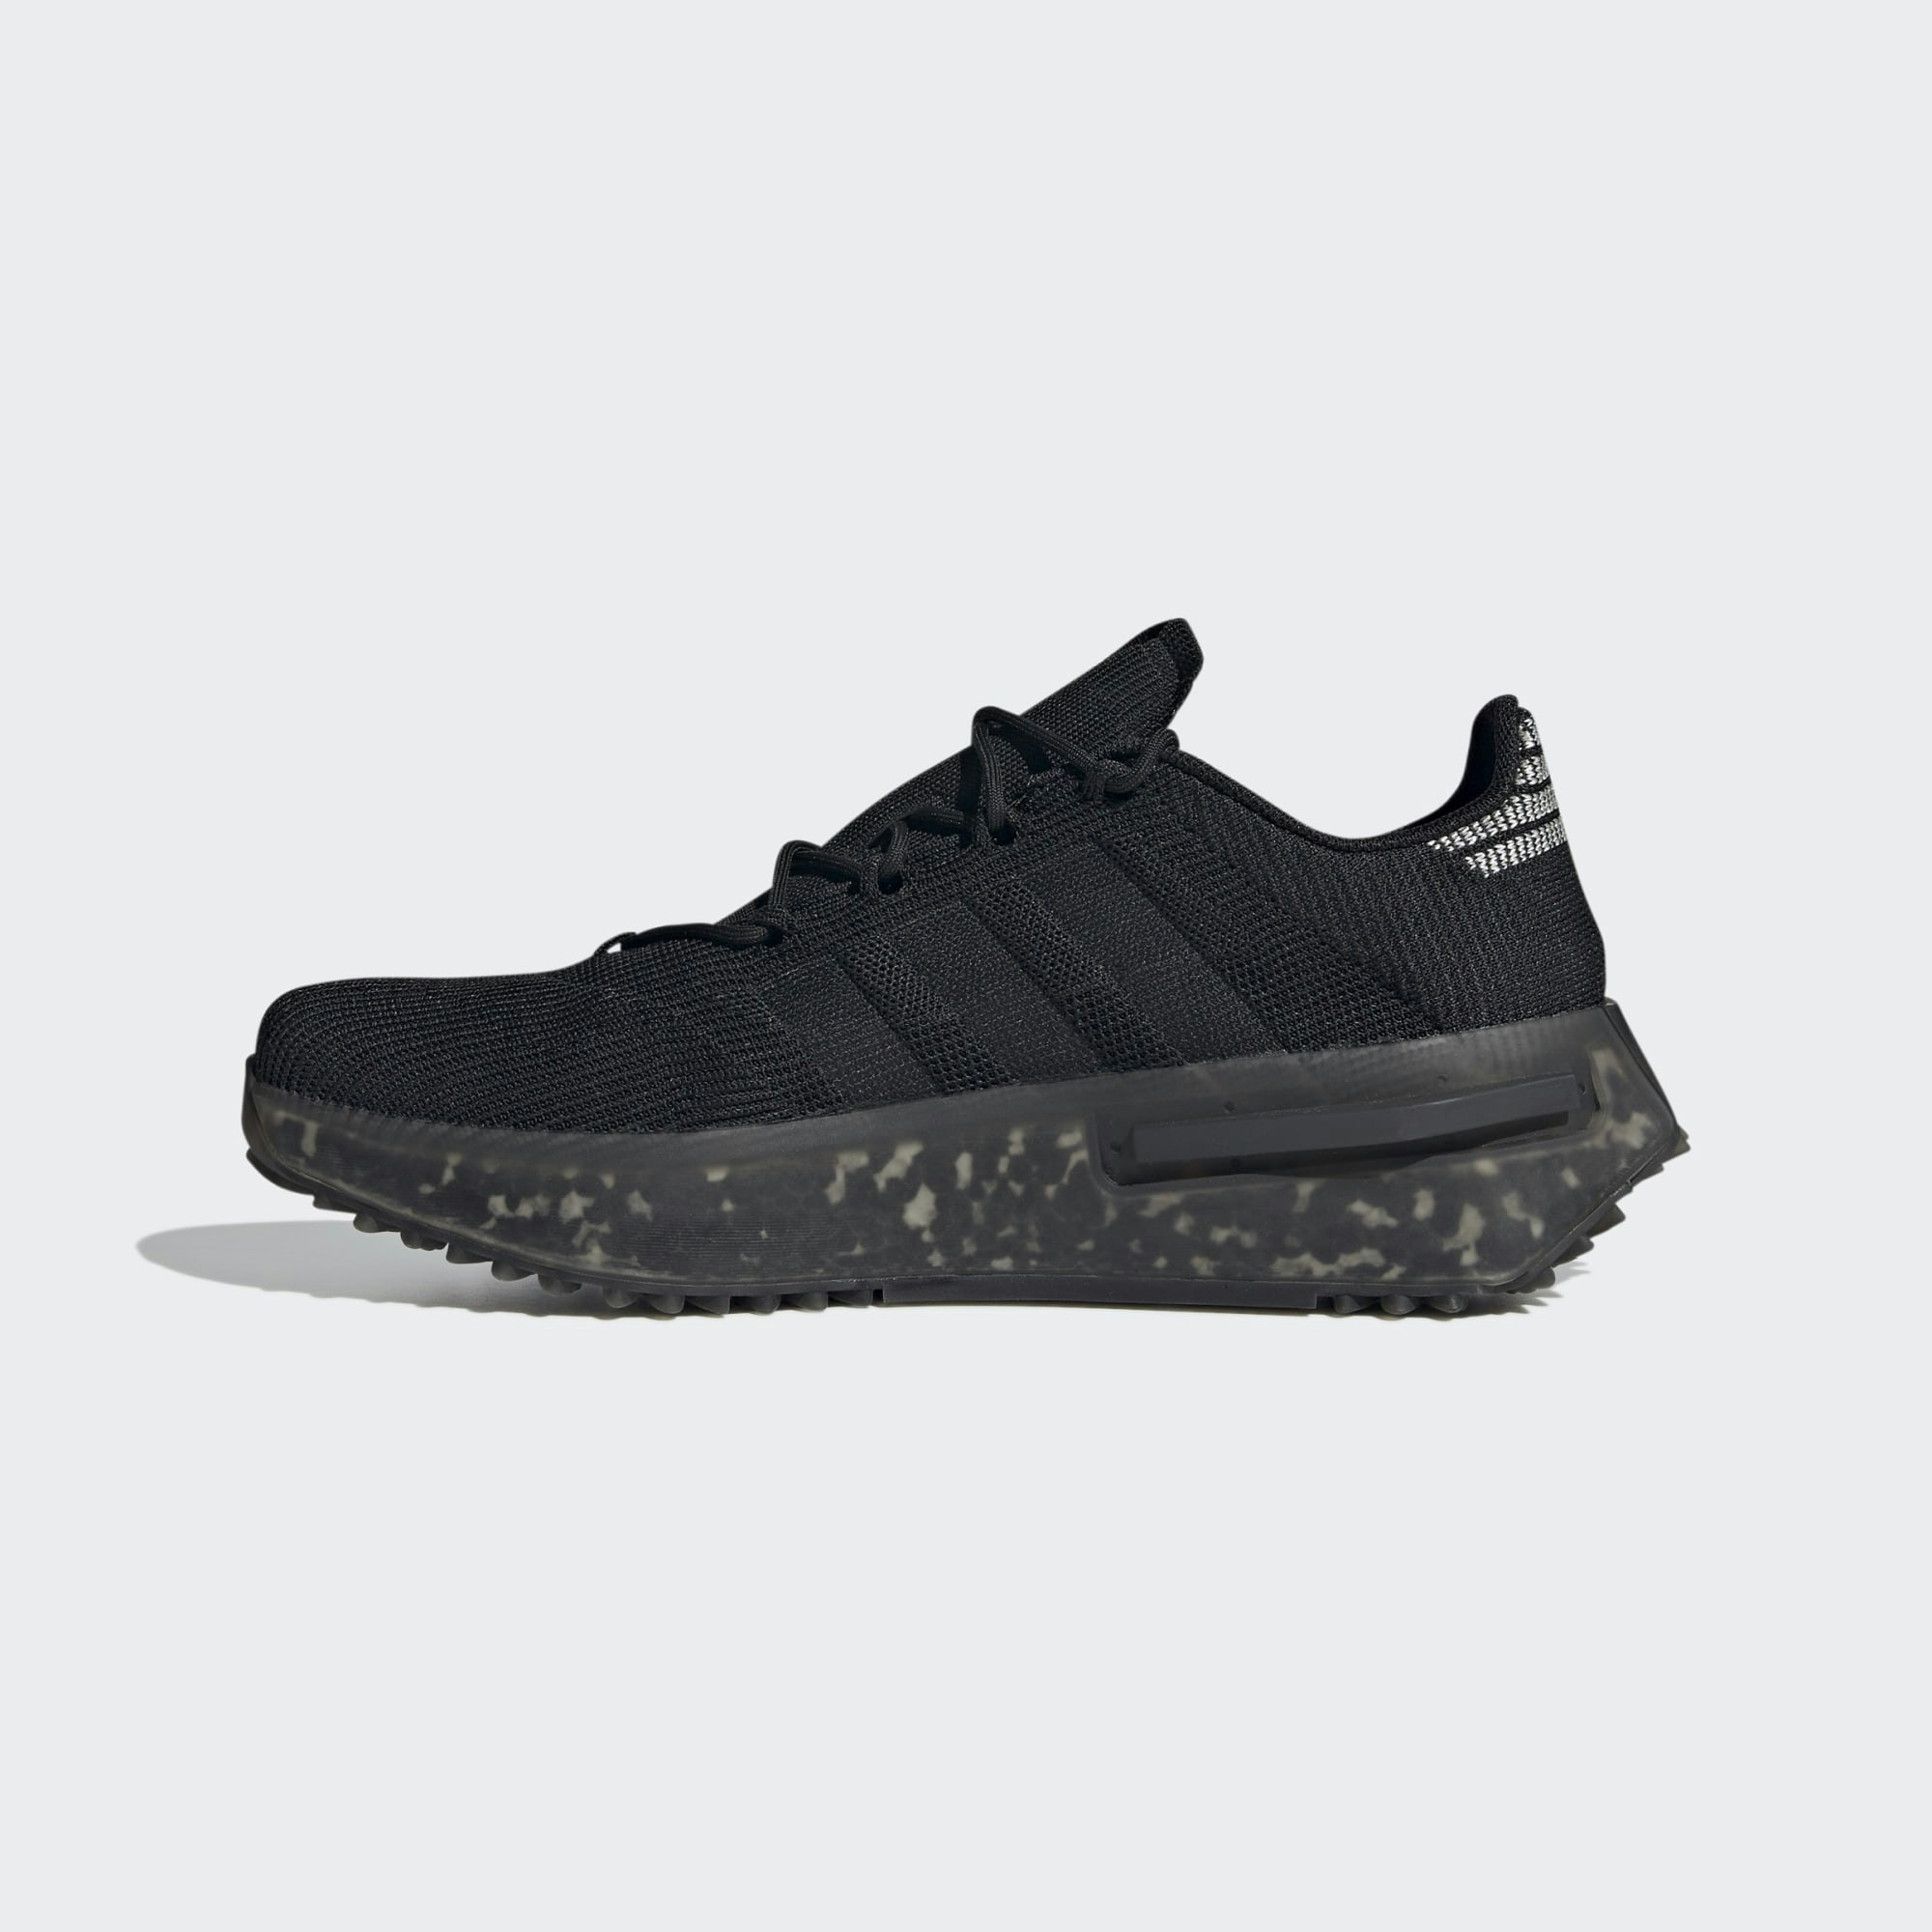 adidas NMD S1 "Made To Be Ready" (Black)